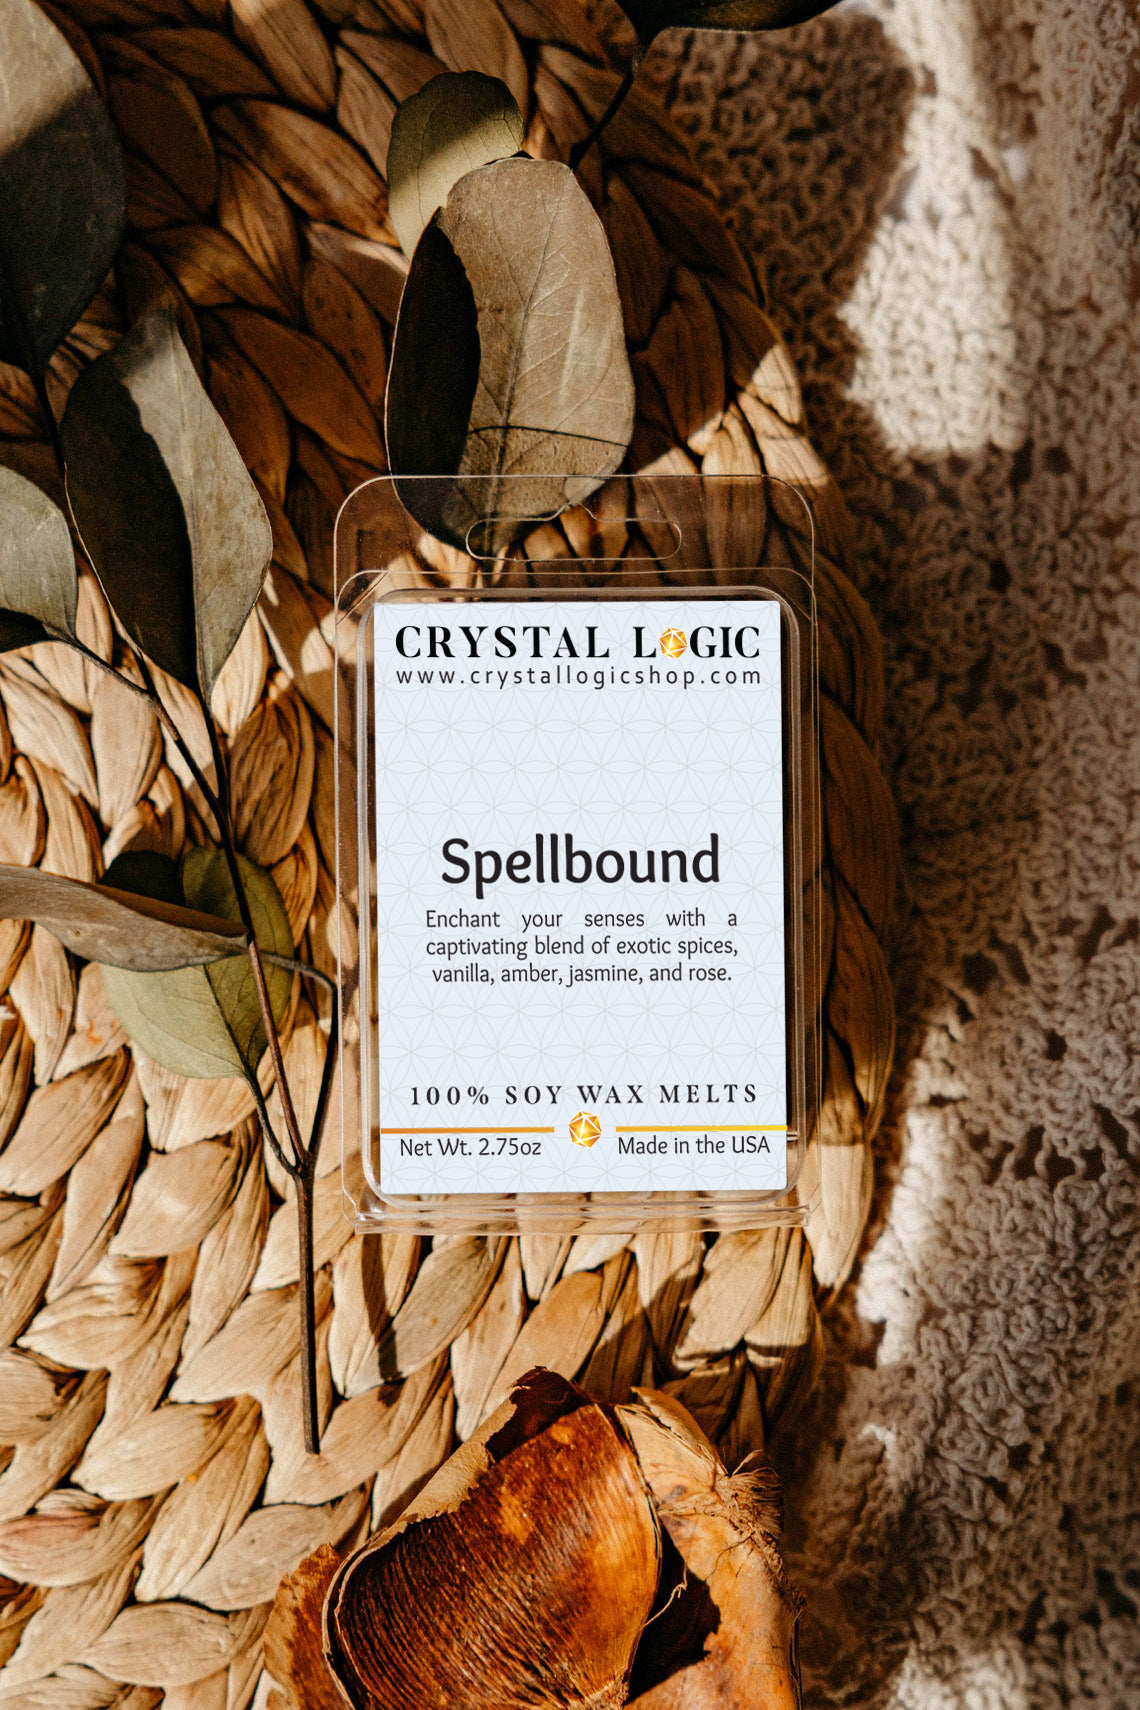 100% Soy Wax Melts - Spellbound